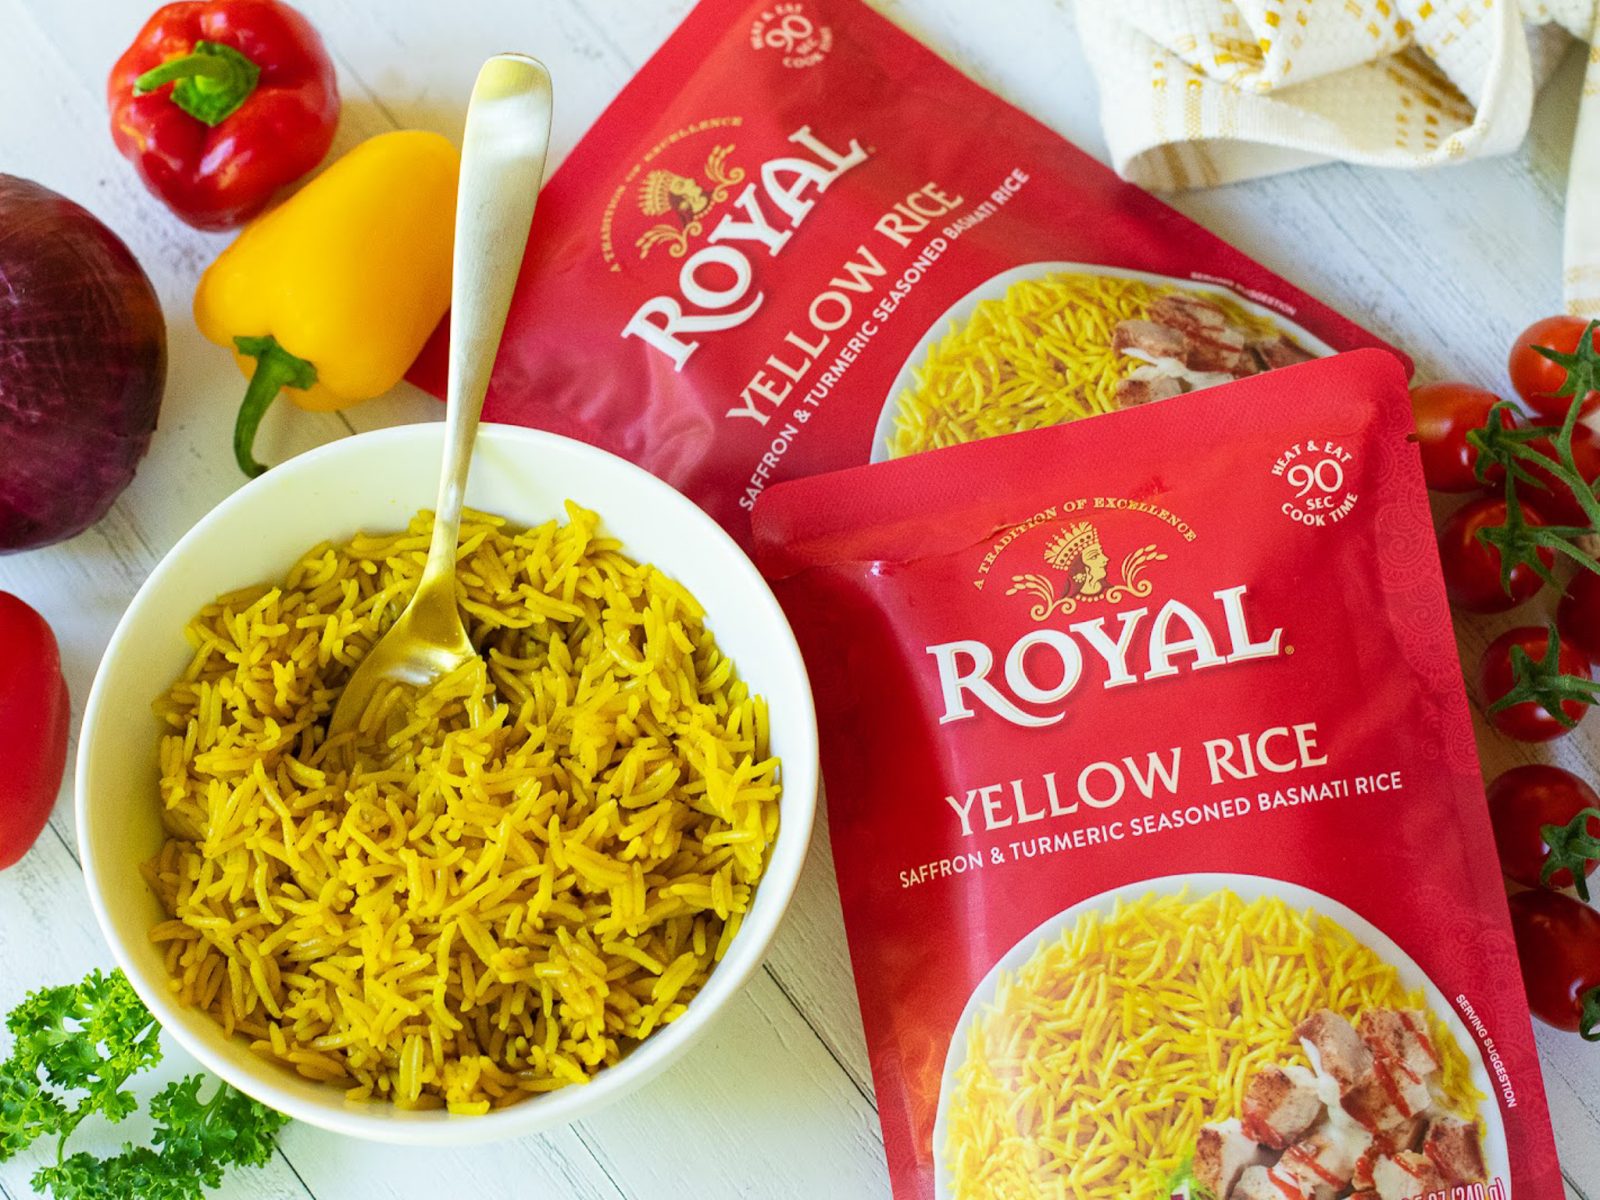 Get Royal Ready To Heat Rice As Low As 67¢ At Publix